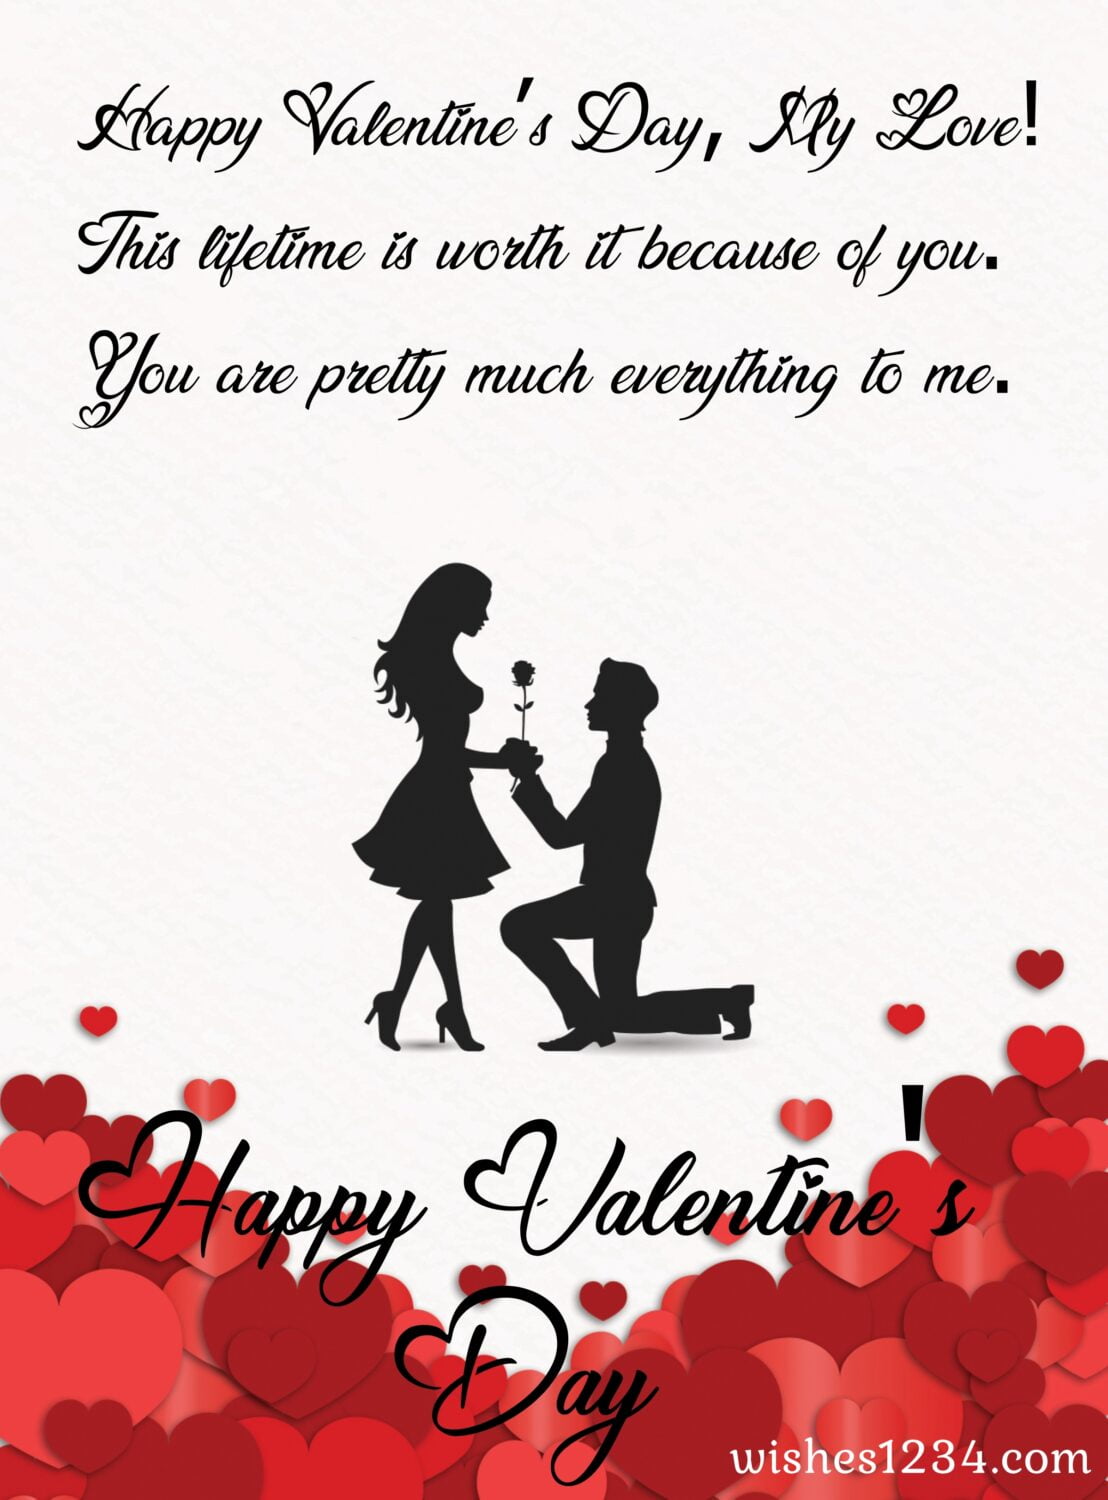 Boy proposing to girl with rose flower in hand, Valentine's Day | Valentine quotes.